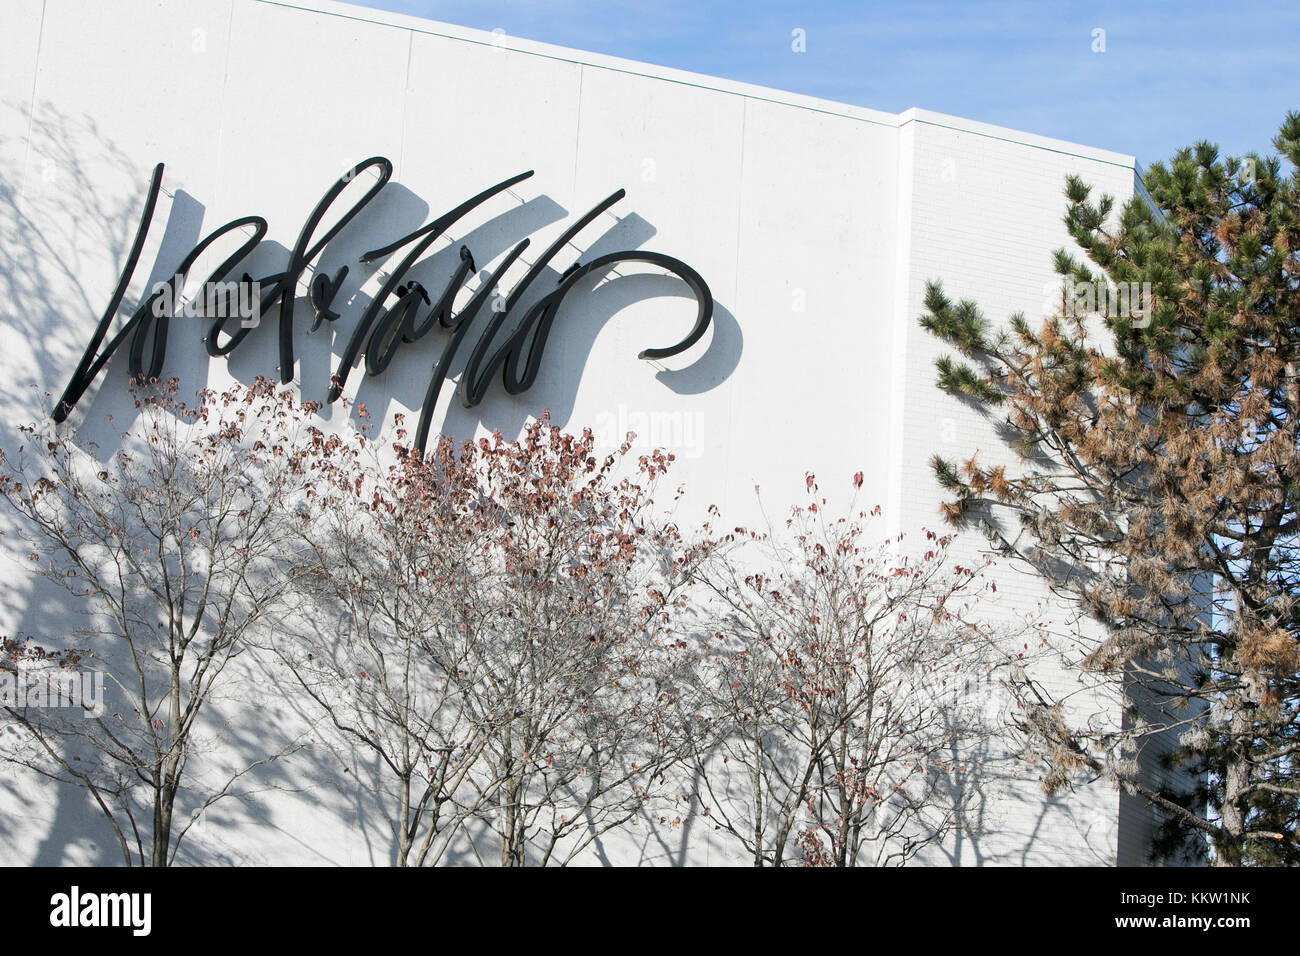 A logo sign outside of a Lord & Taylor retail store location in